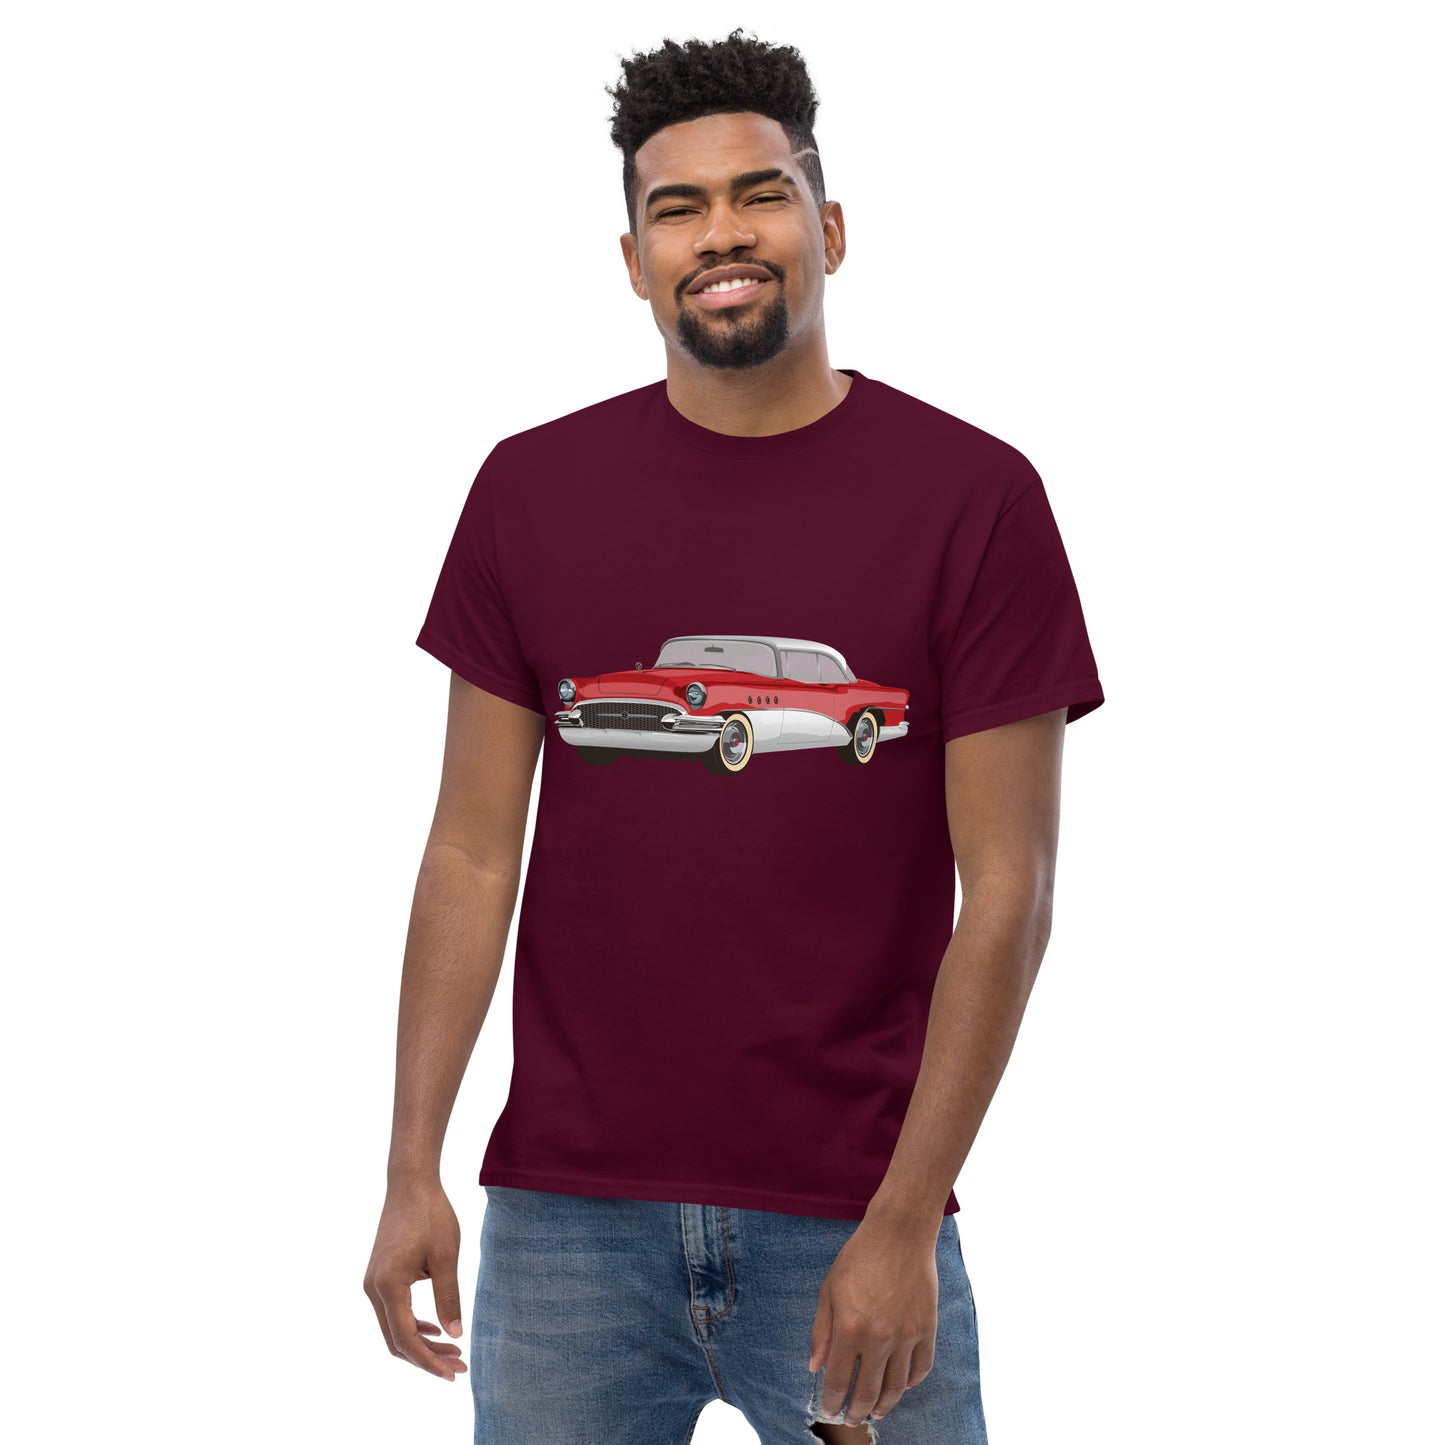 Men with maroon t-shirt with red Chevrolet 